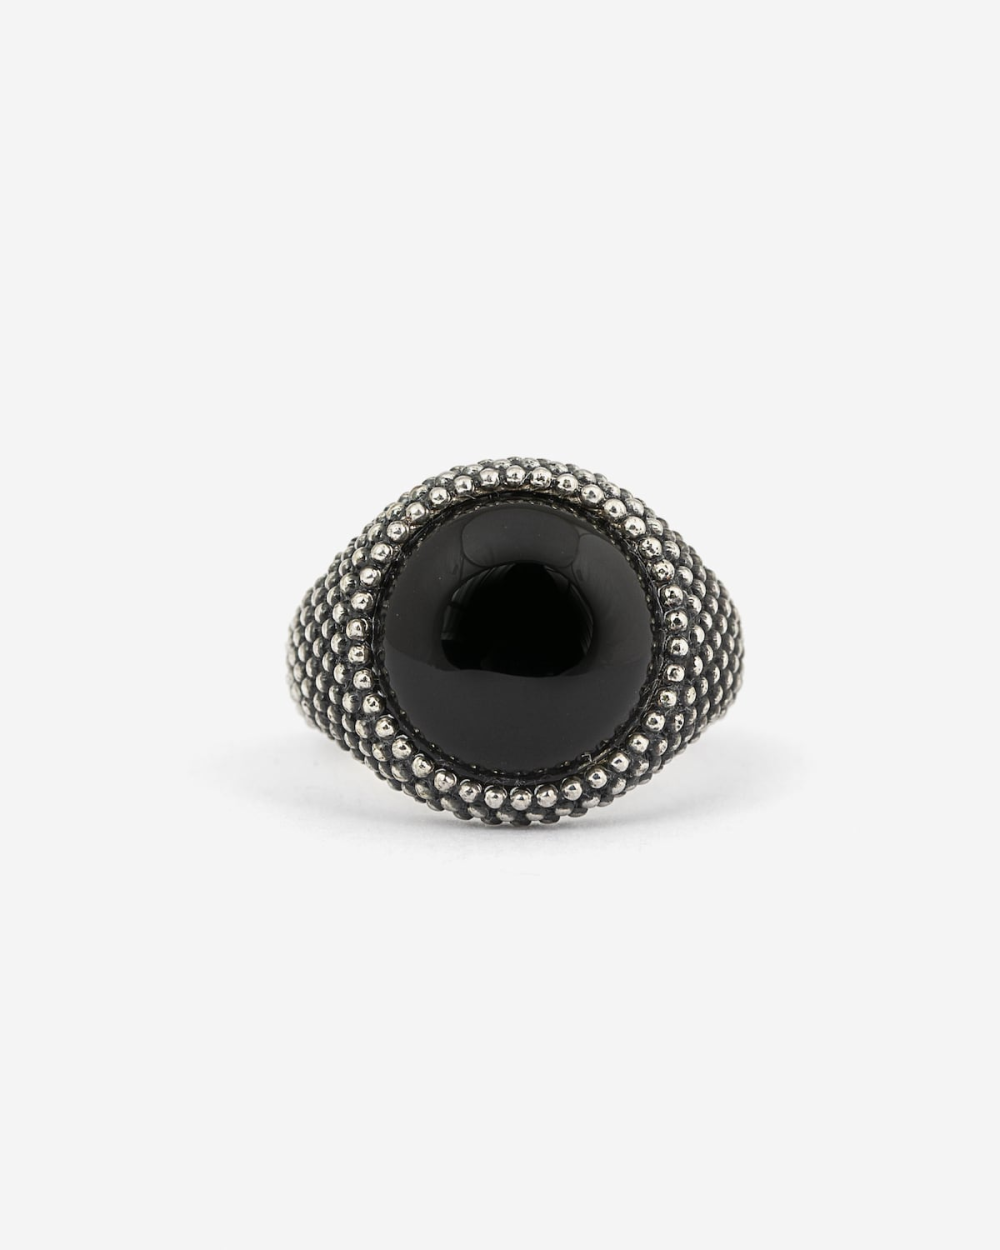 DOTTED ROUND ONYX SIGNET RING